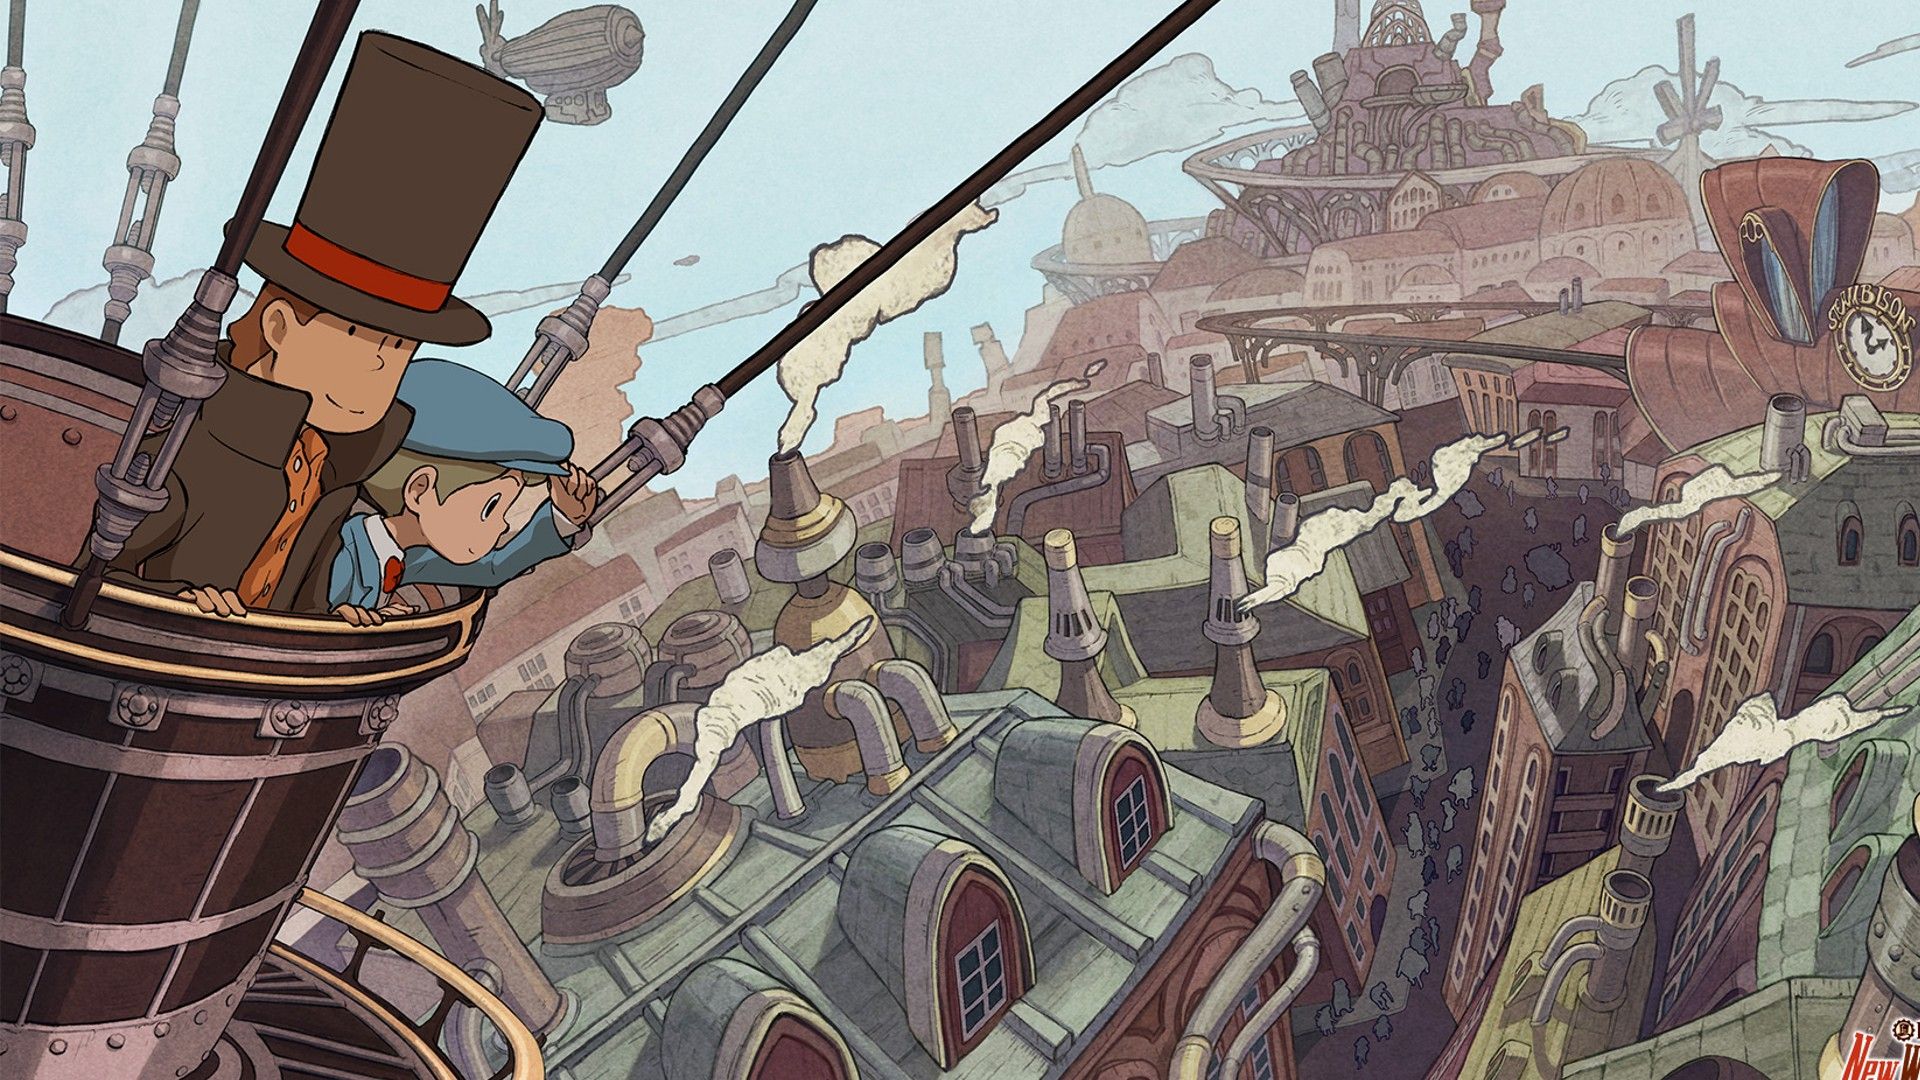 Join the Seductive Professor Layton on a Steam-Powered Adventure